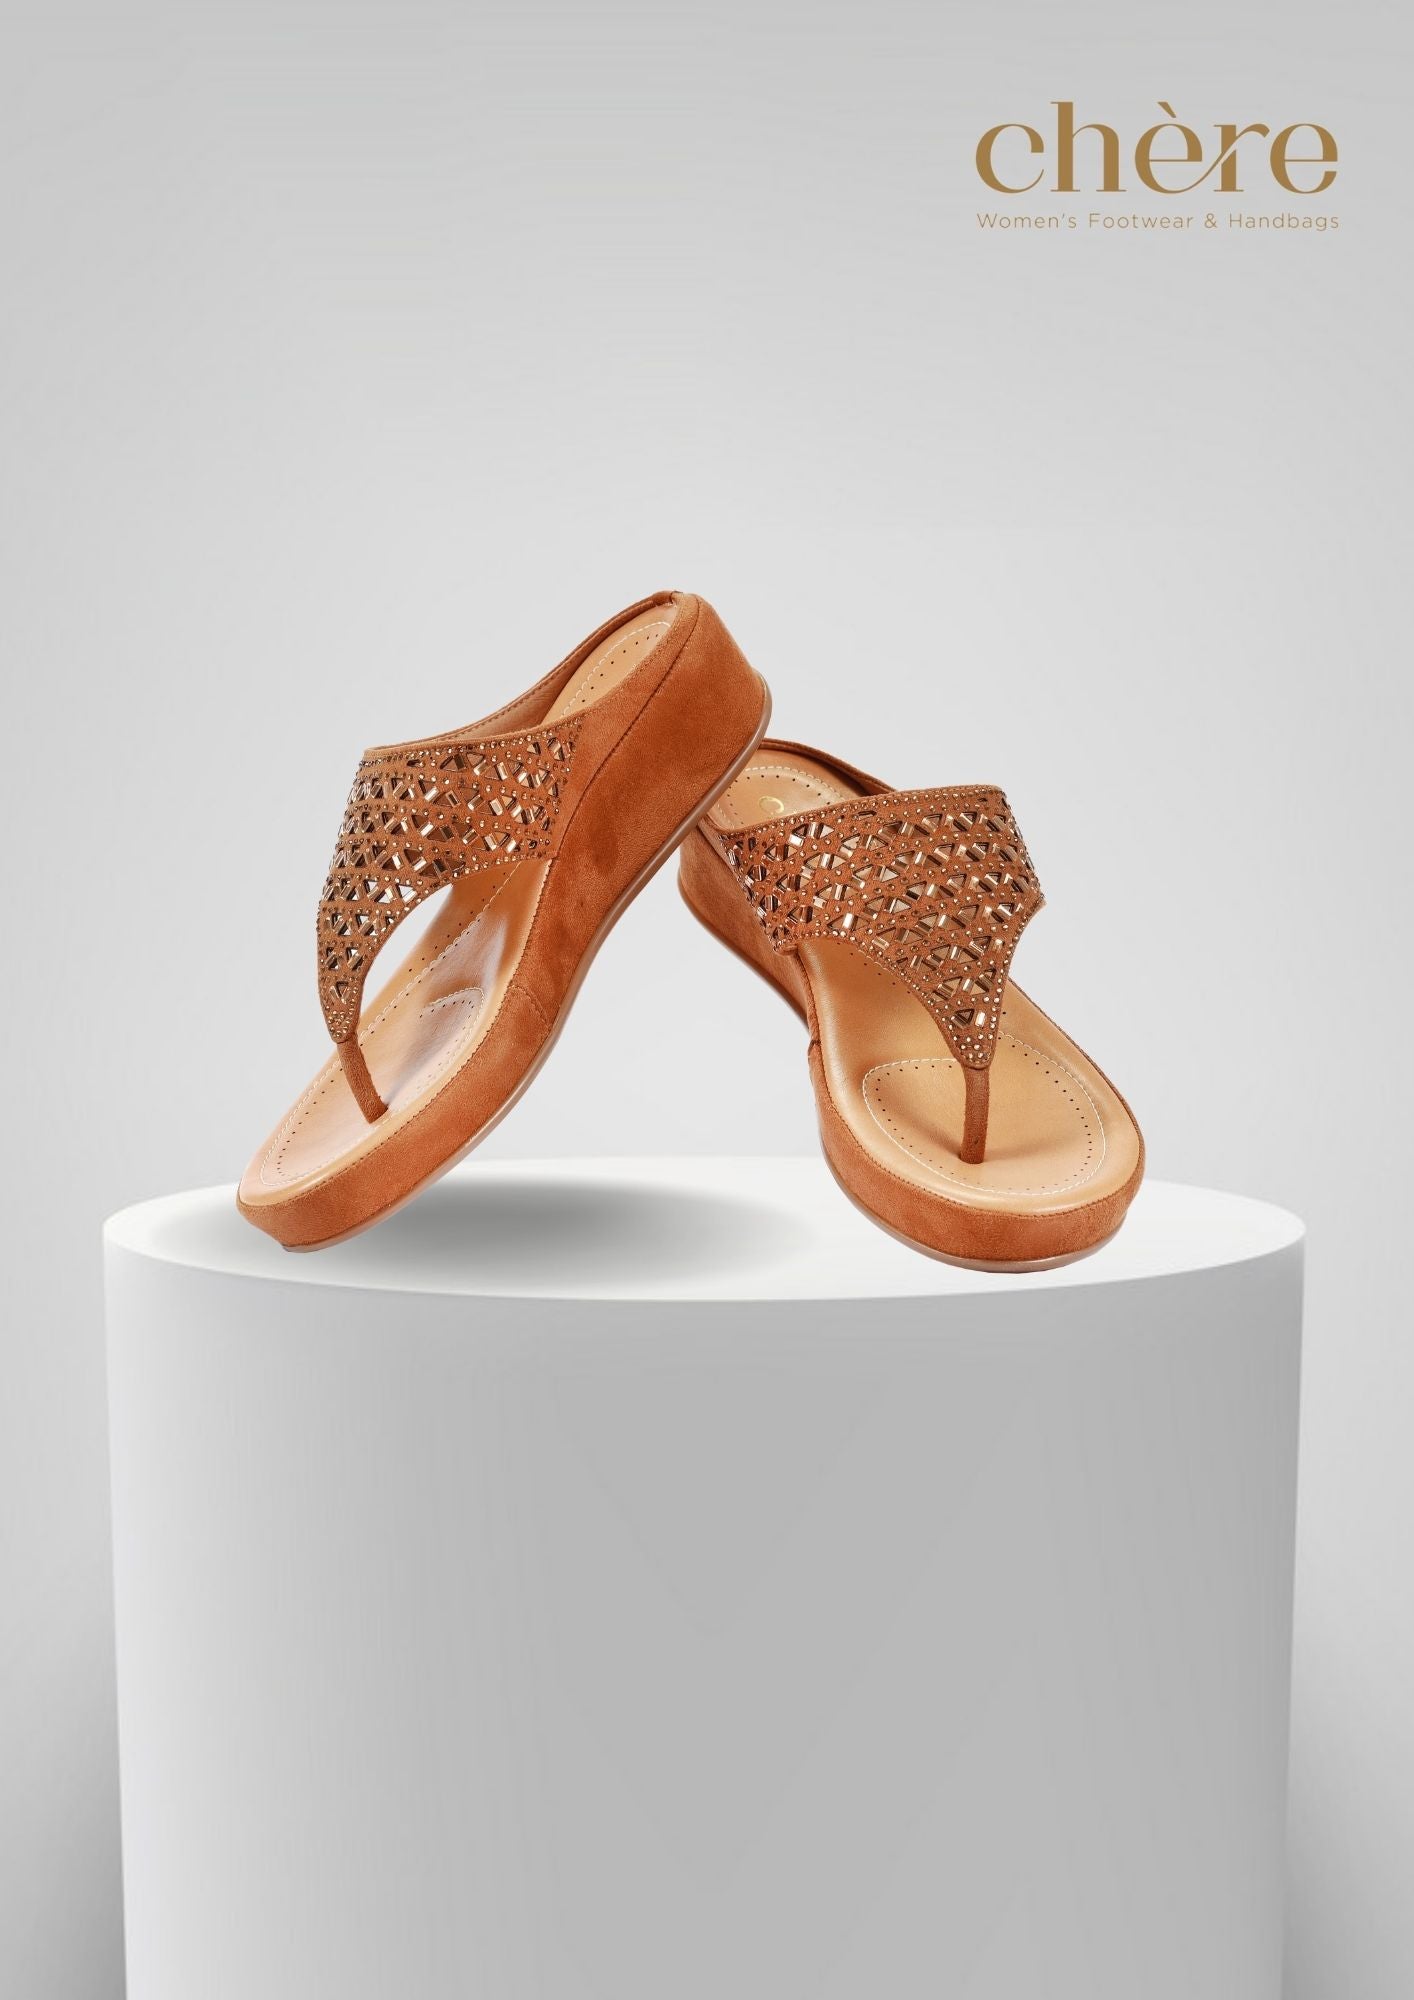 Brown Embellished Laser Cut With Super Cushioned Sandals